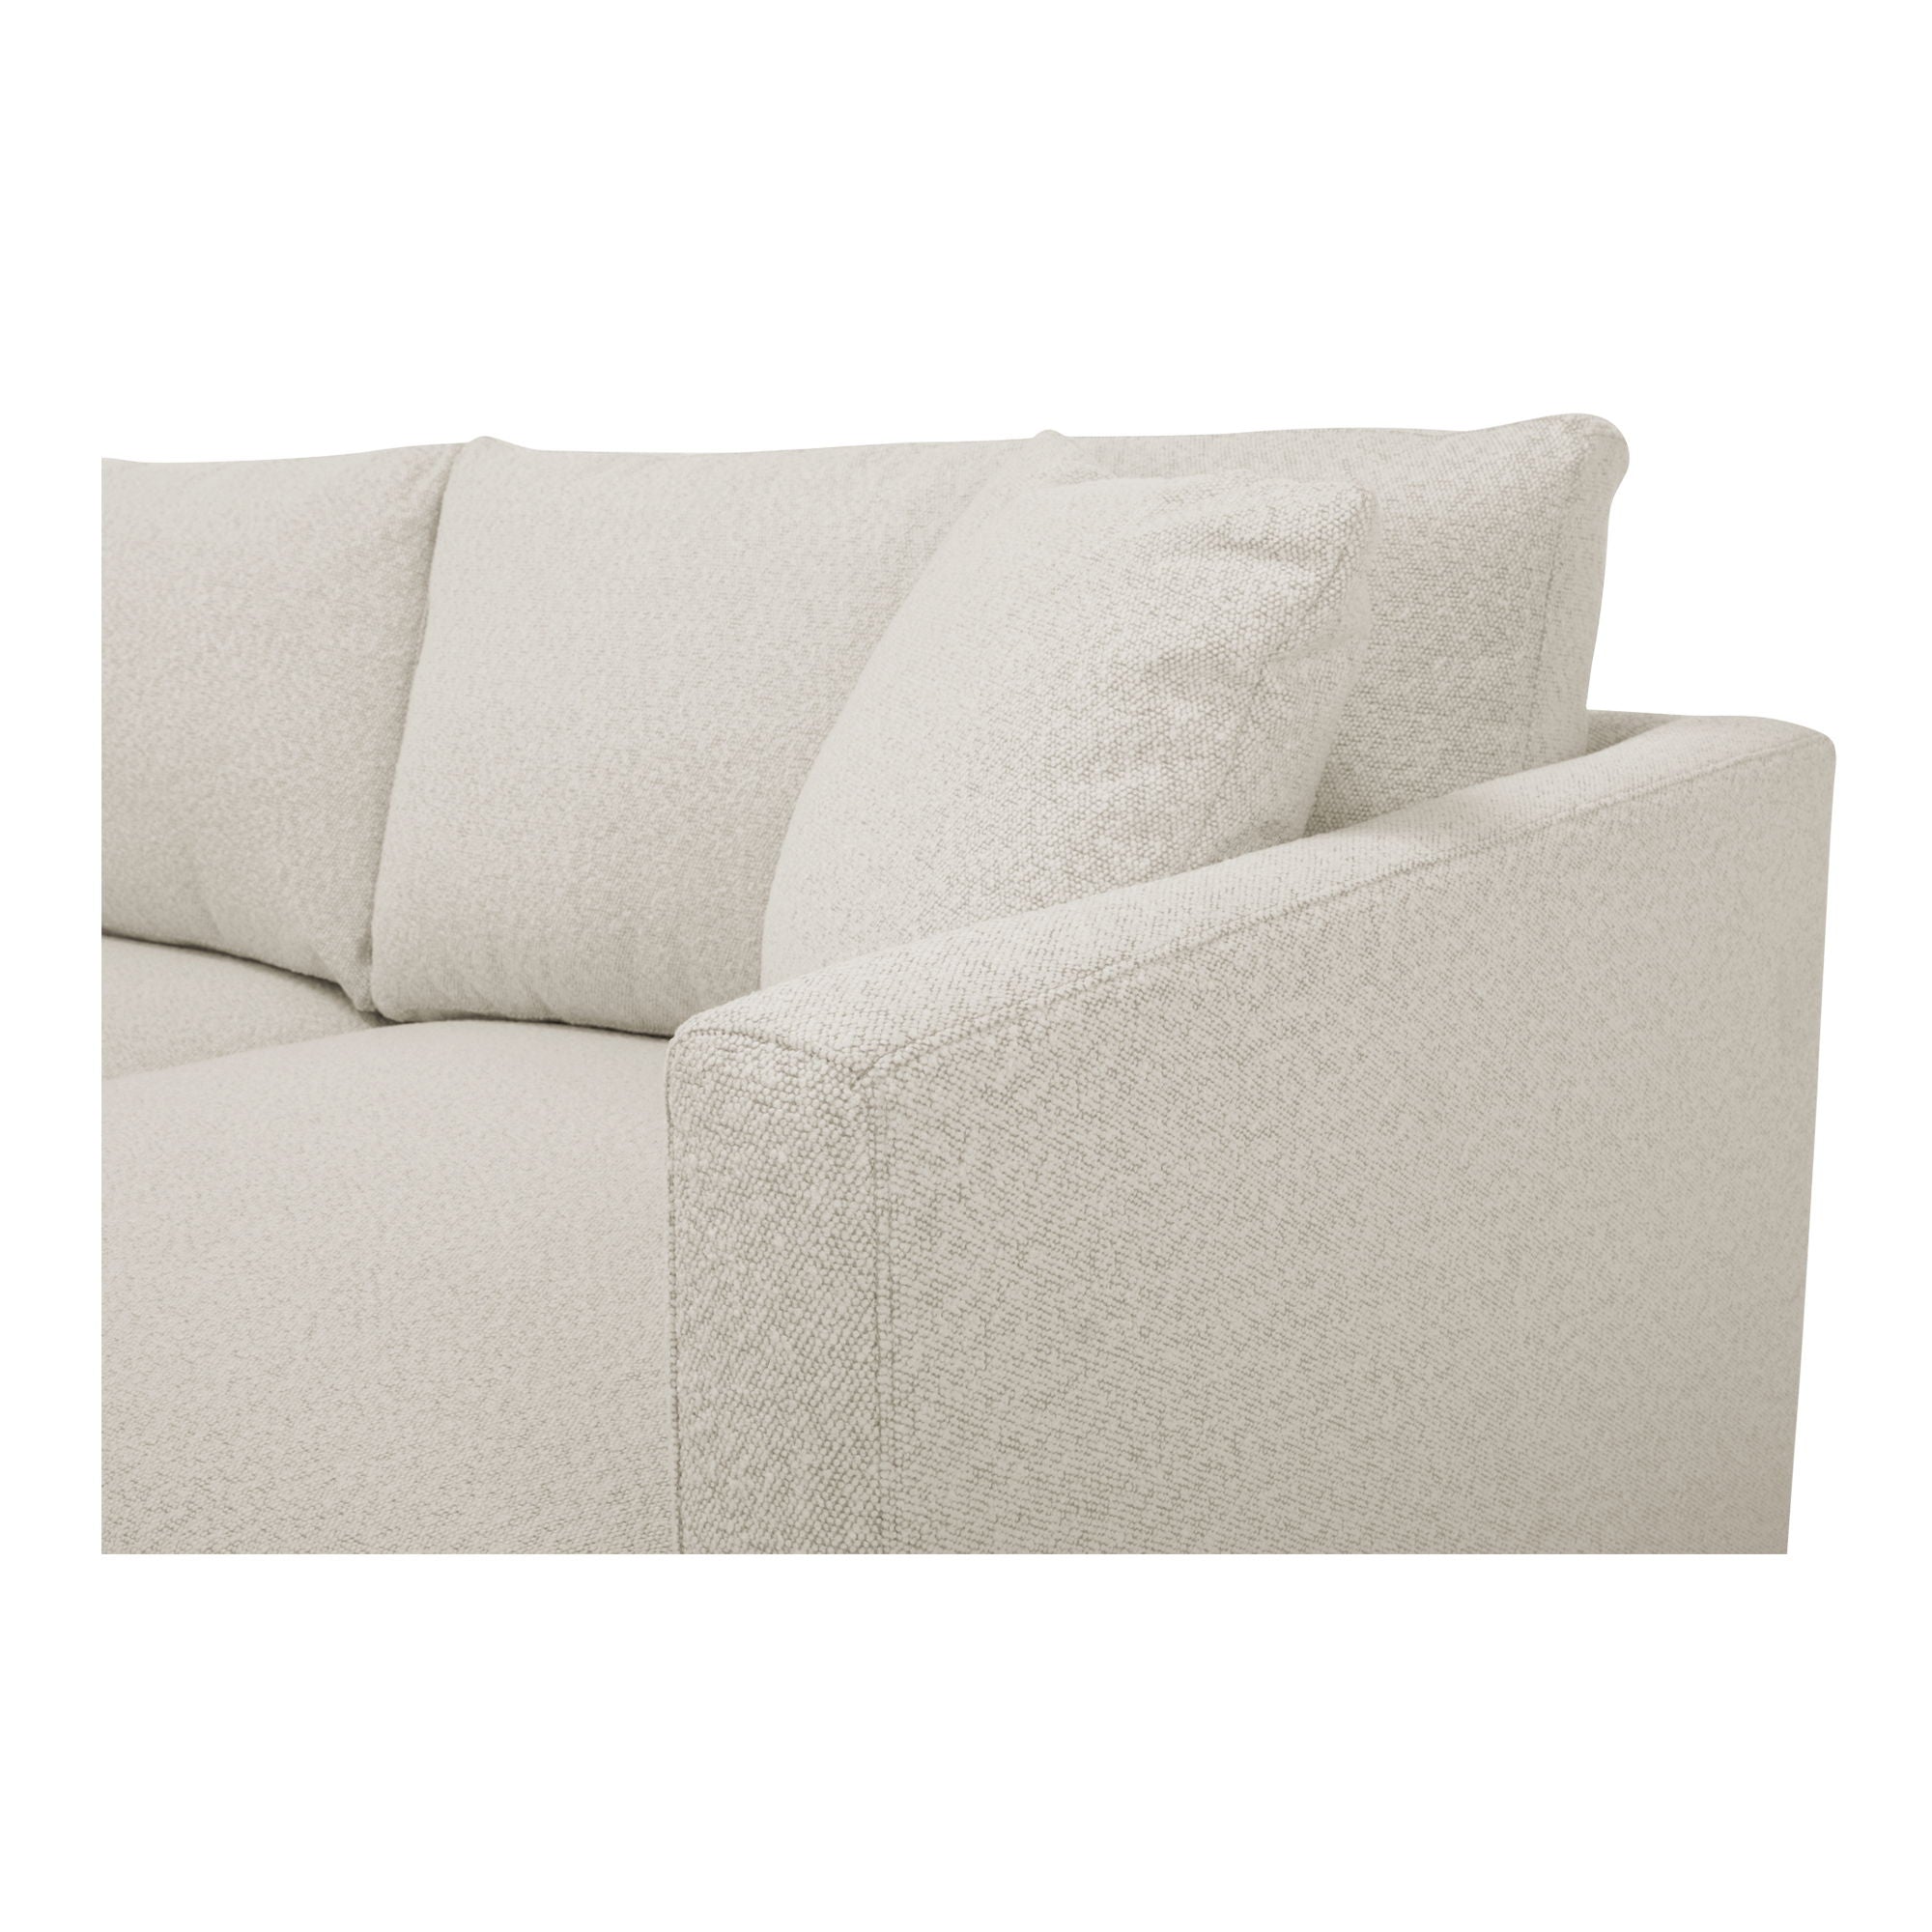 Bryn - Sectional Left - Oyster